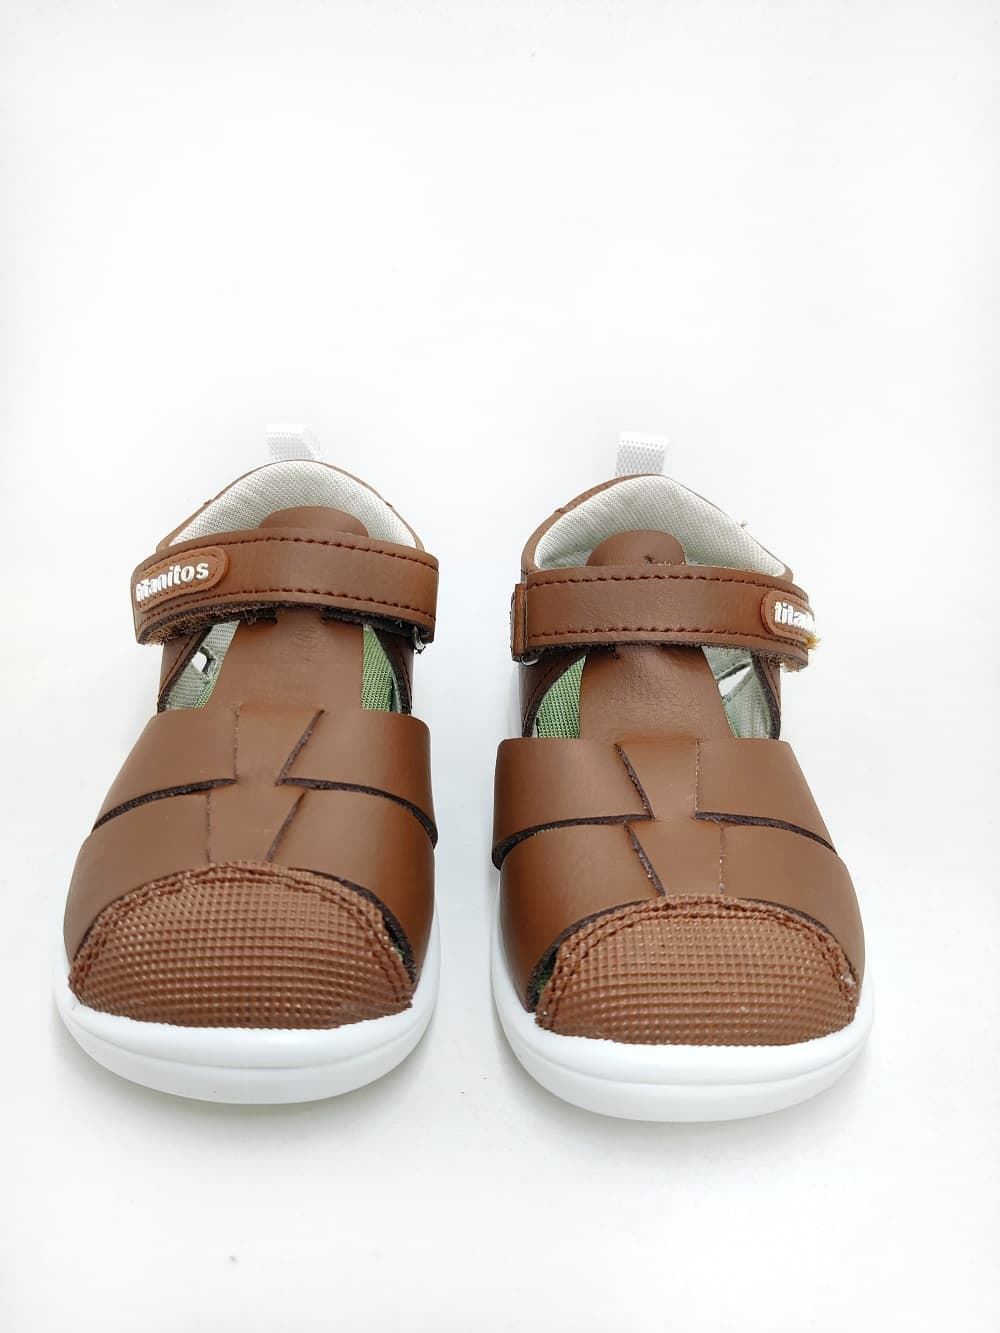 Titanitos Respectful baby sandals Eric Roble - Image 4